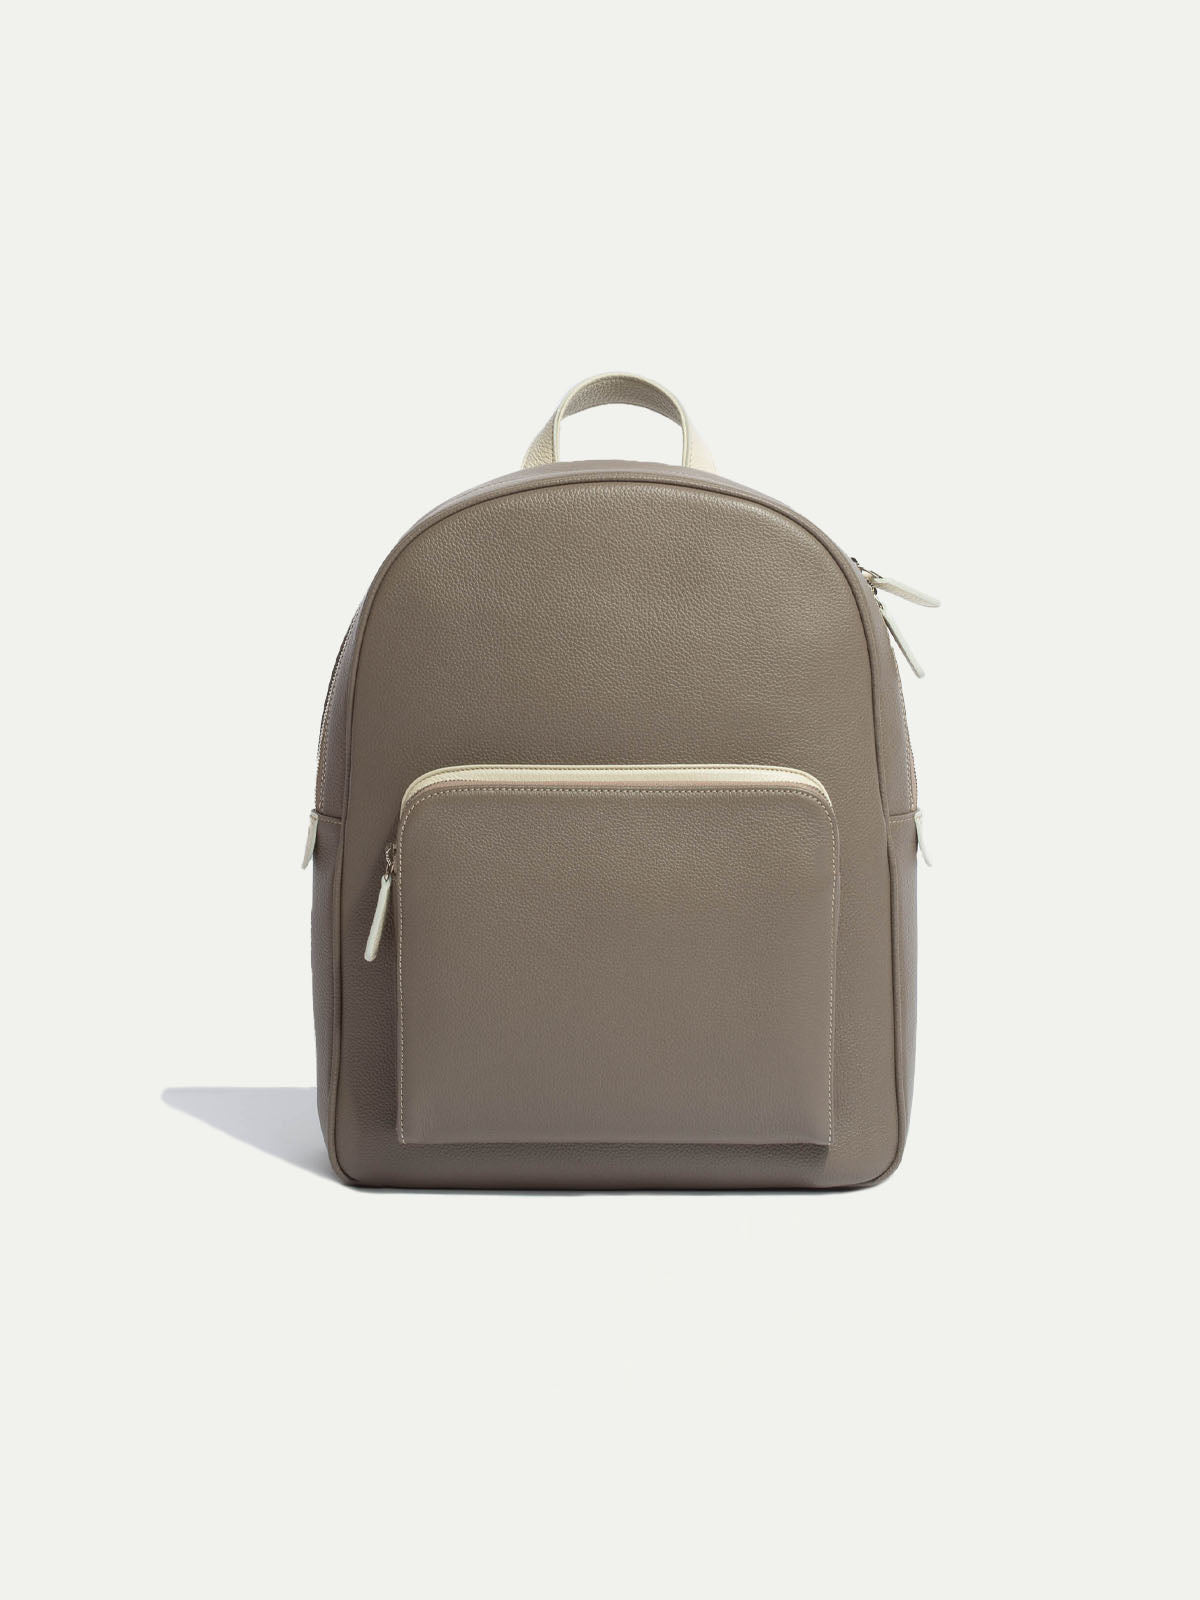 luxury leather backpack, taupe backpack, taupe leather backpack, sac à dos taupe, sac à dos en cuir, sac à dos en cuir taupe